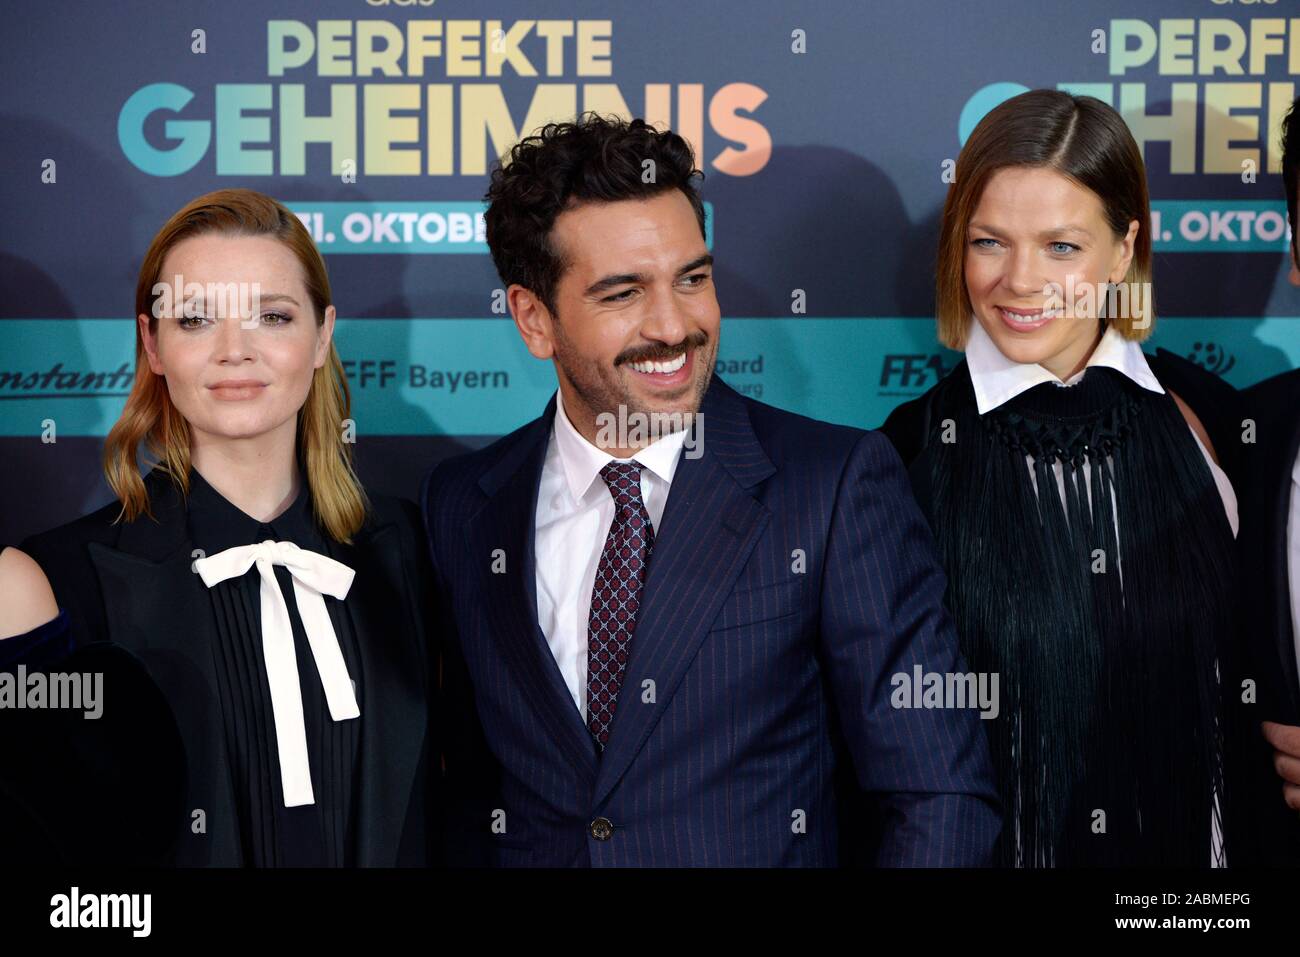 From left to right: The actors Karoline Herfurth, Elias M´Barek and Jessica Schwarz at the premiere of the movie 'Das perfekte Geheimnis' at the Mathäser Kino in Munich. [automated translation] Stock Photo